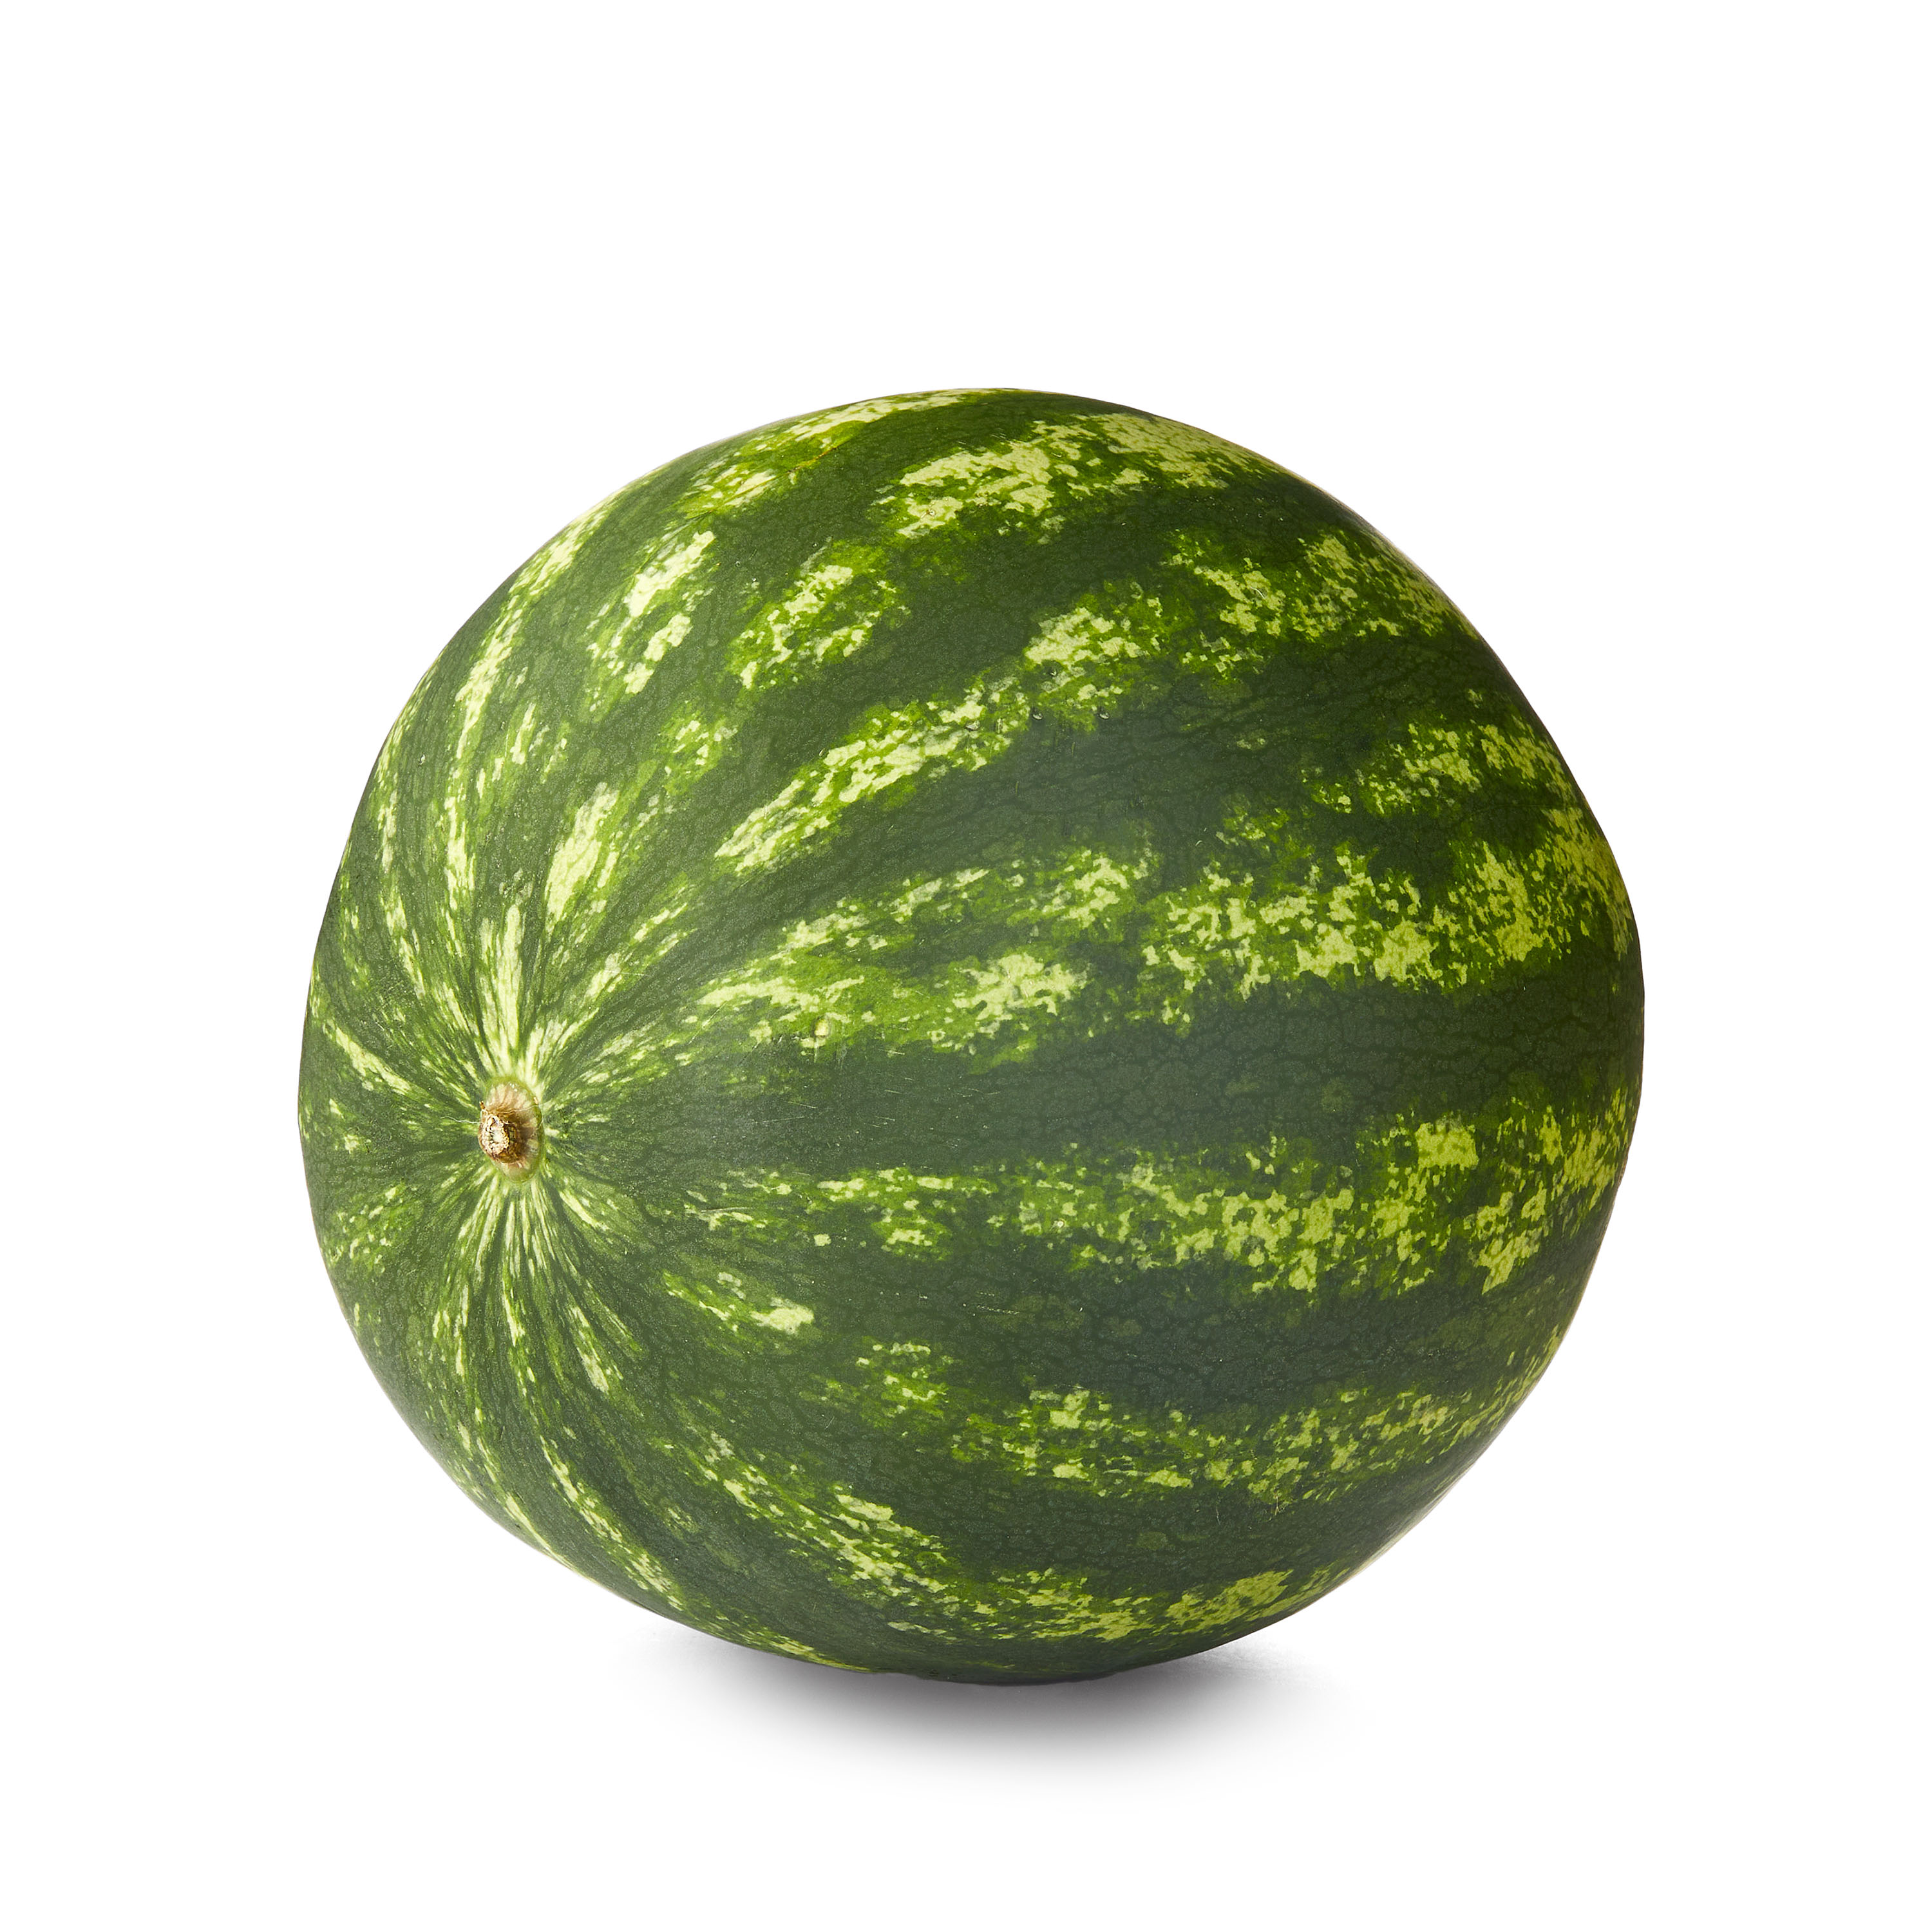 Fresh Personal Watermelon, Each - image 2 of 6